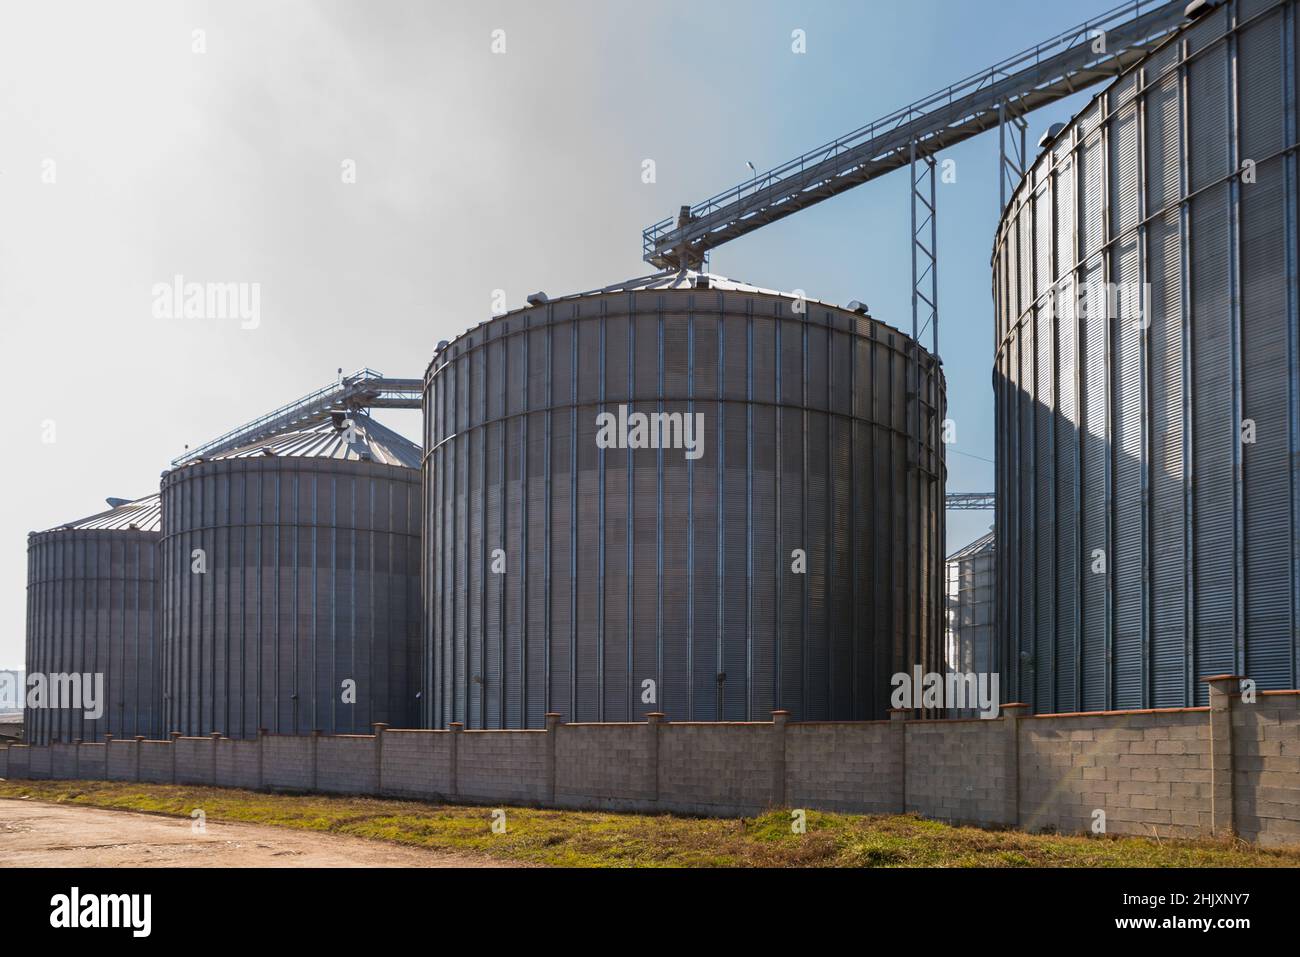 Agricultural Silos. Storage and drying of grains Stock Photo